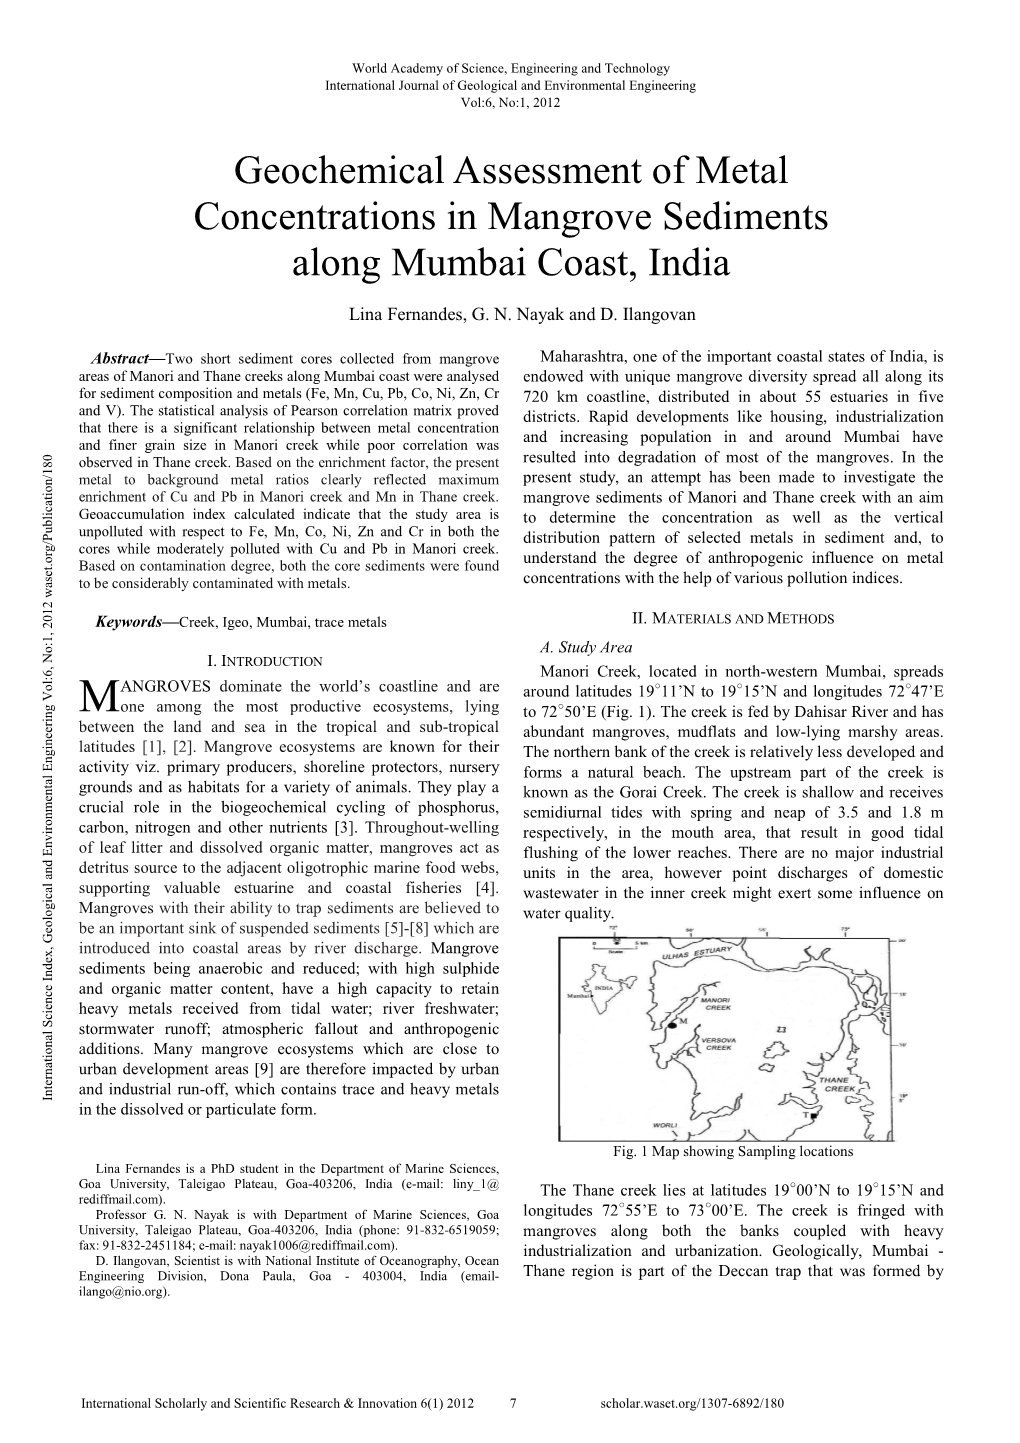 Geochemical Assessment of Metal Concentrations in Mangrove Sediments Along Mumbai Coast, India